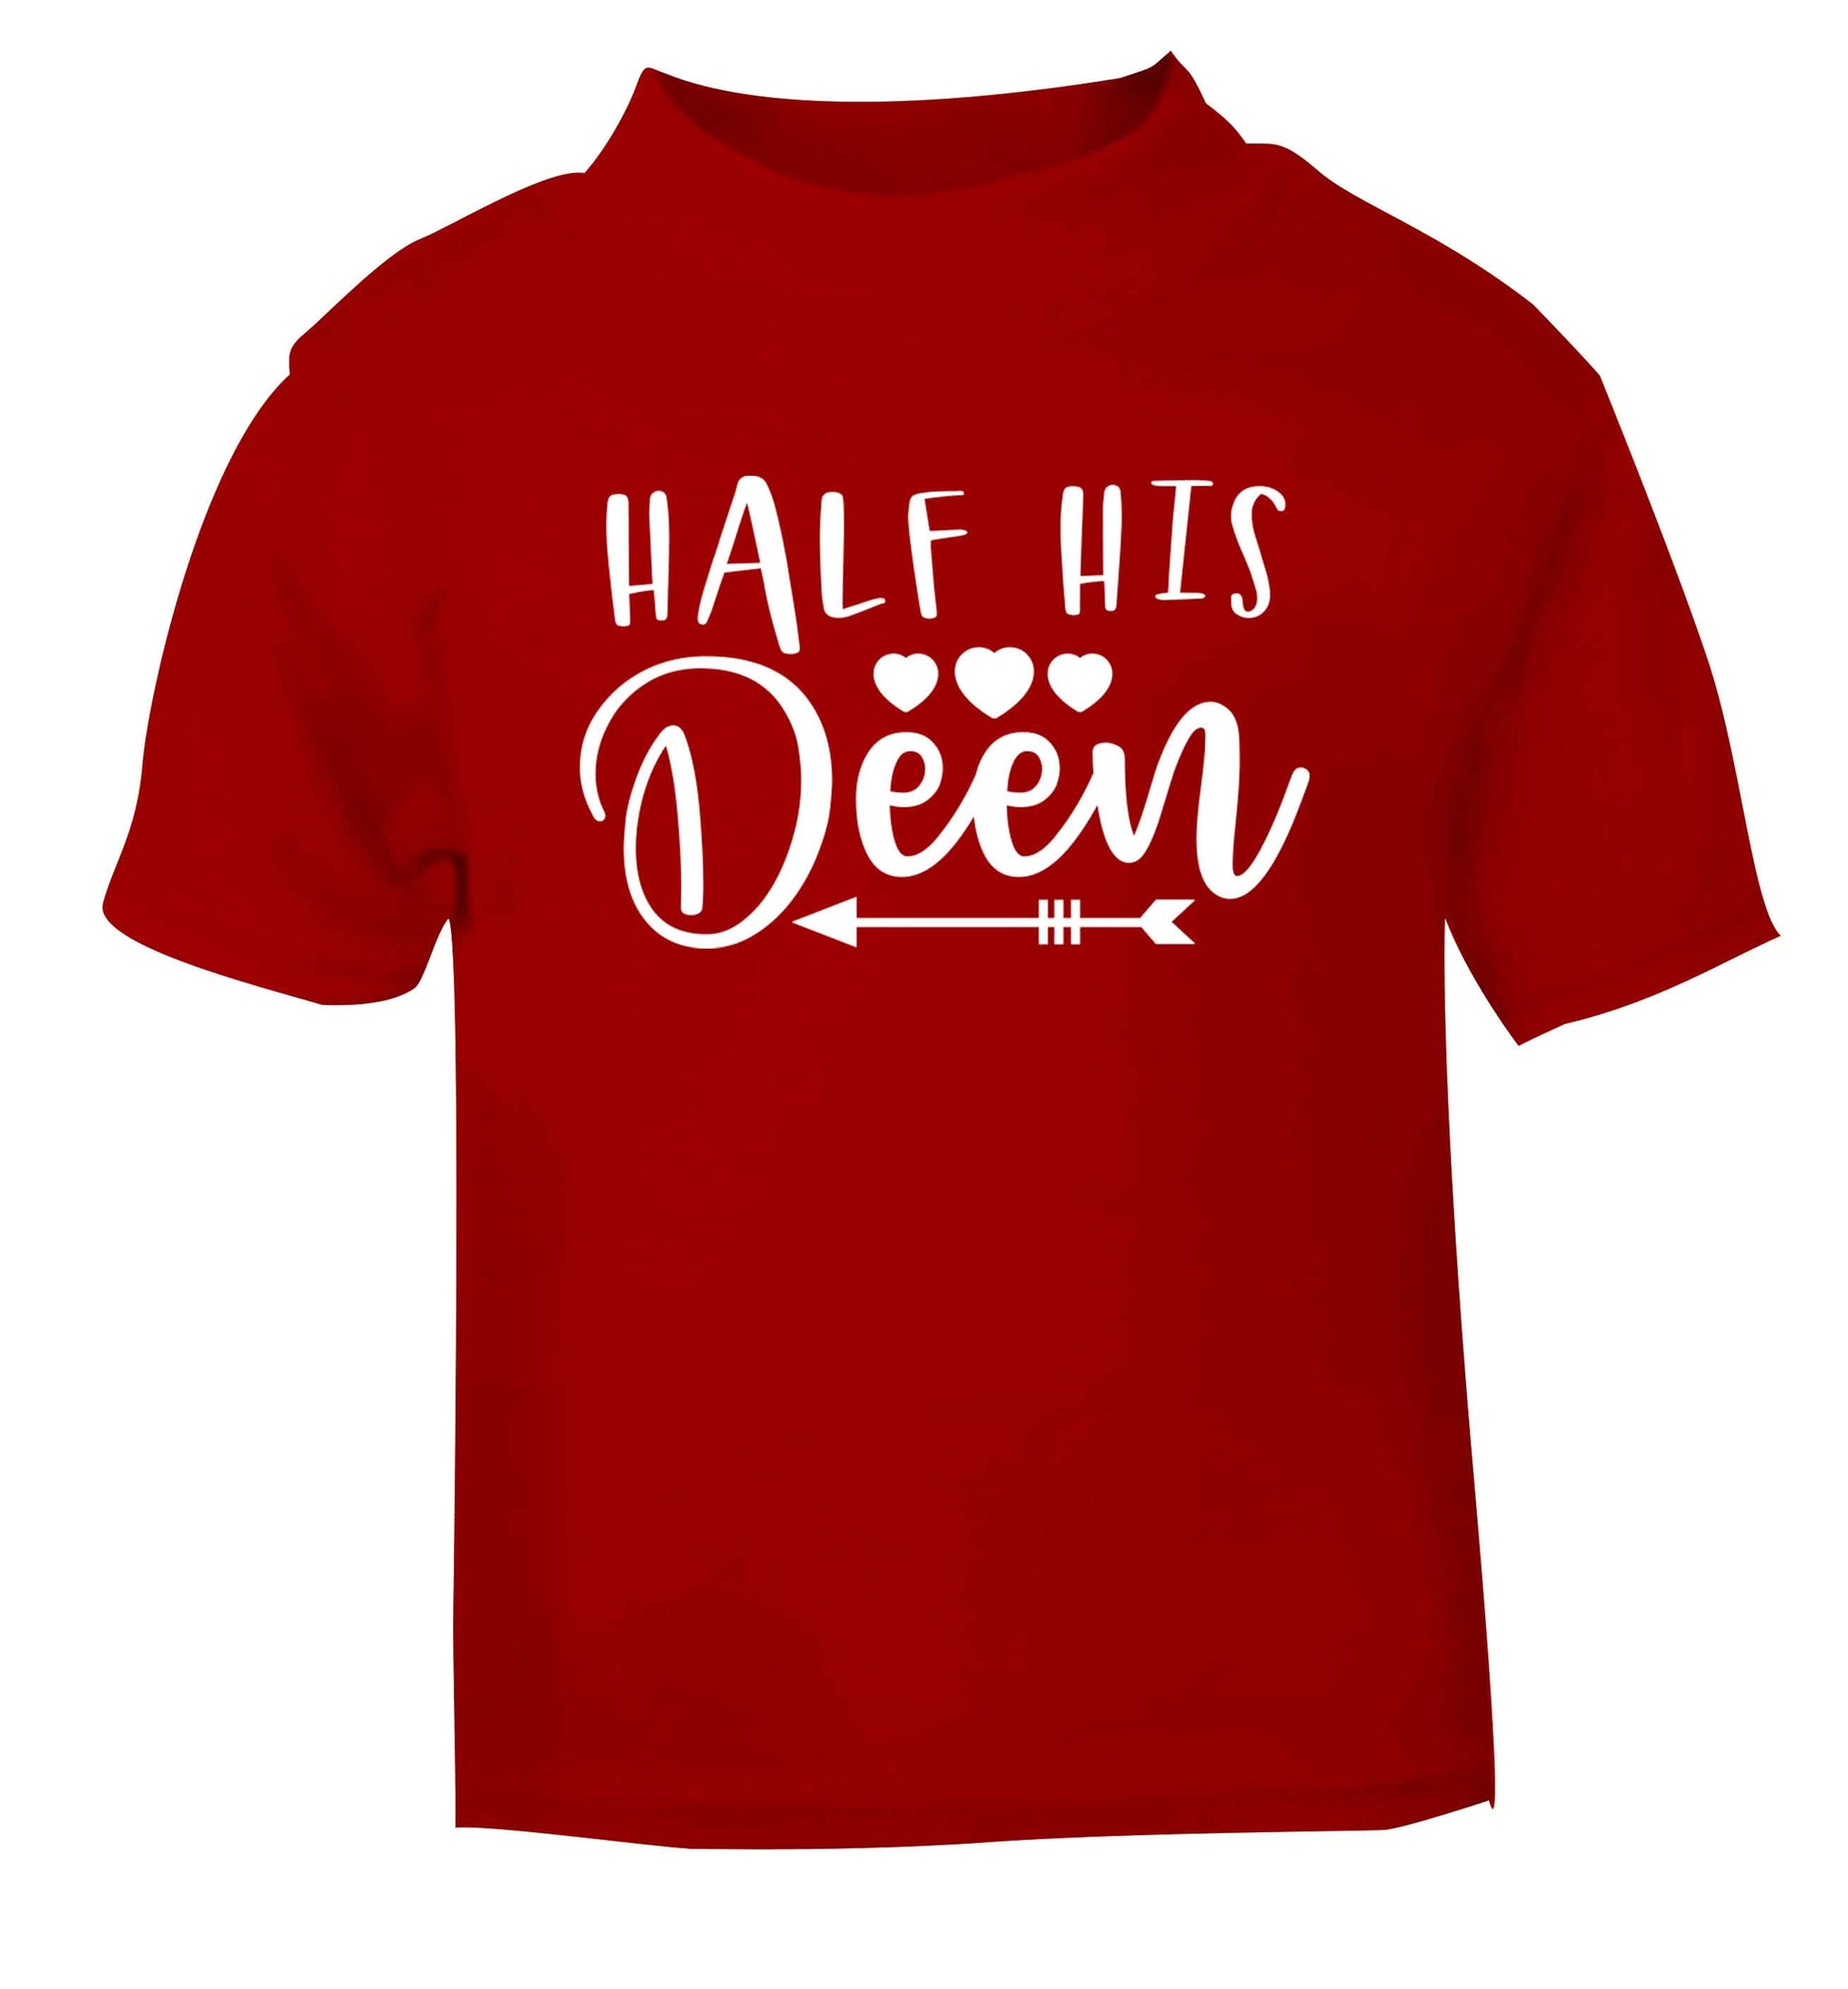 Half his deen red Baby Toddler Tshirt 2 Years